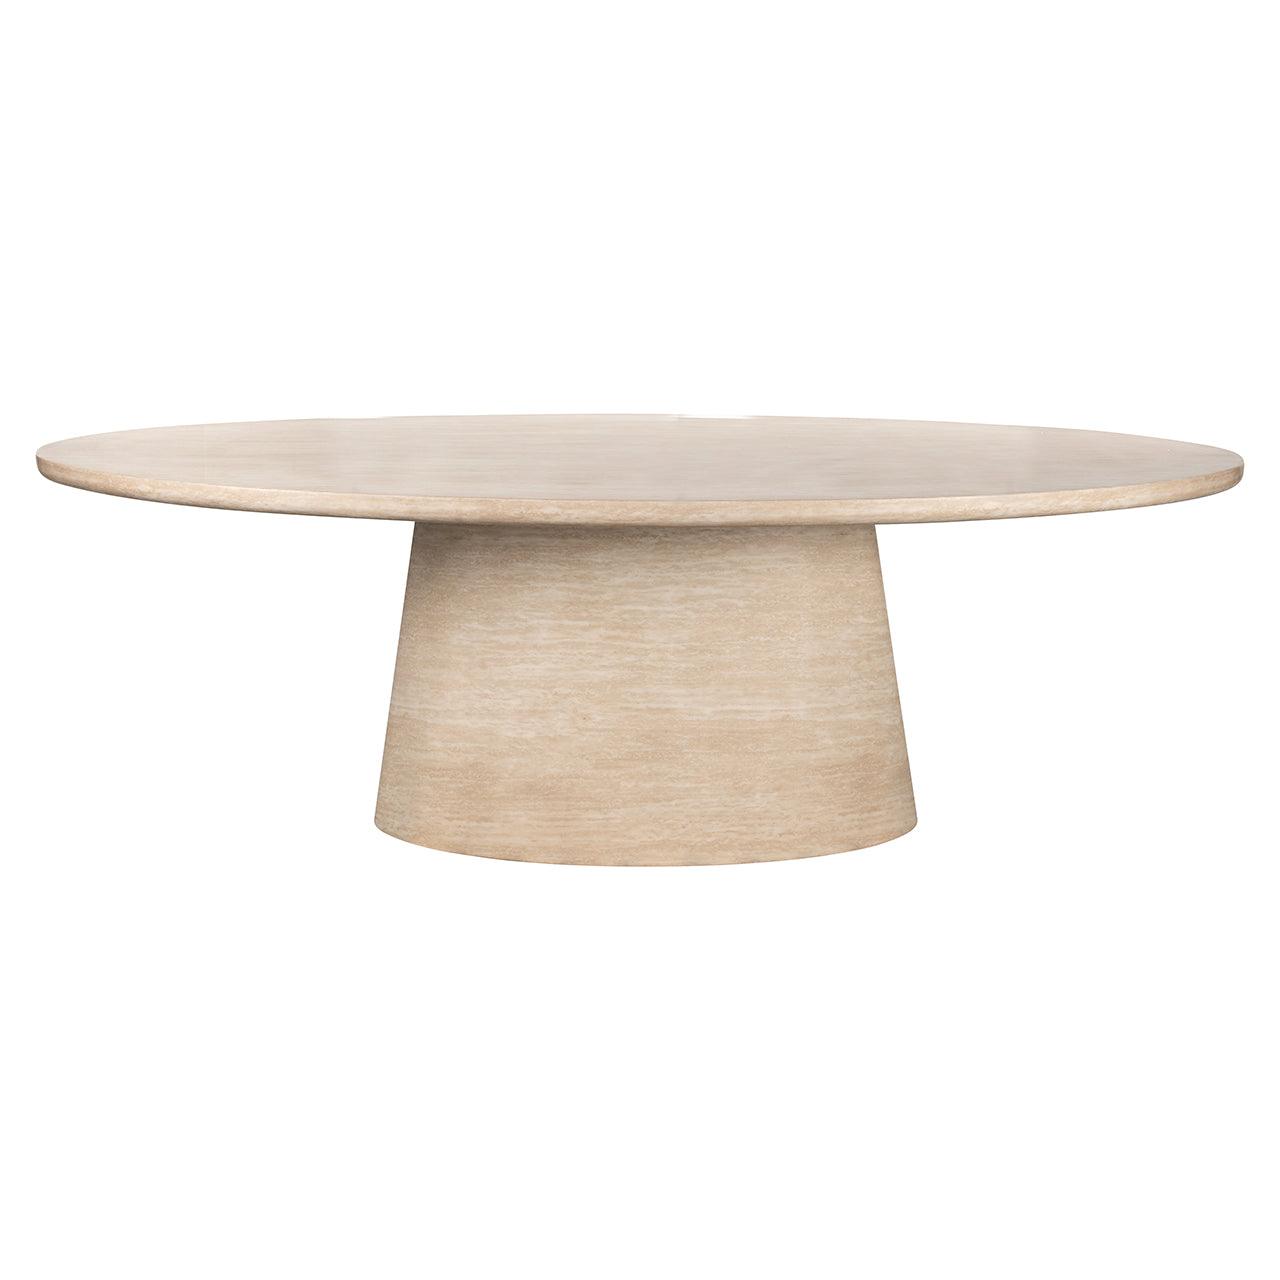 Fictus Faux Travertine Oval Dining Table by Richmond Interiors - Maison Rêves UK